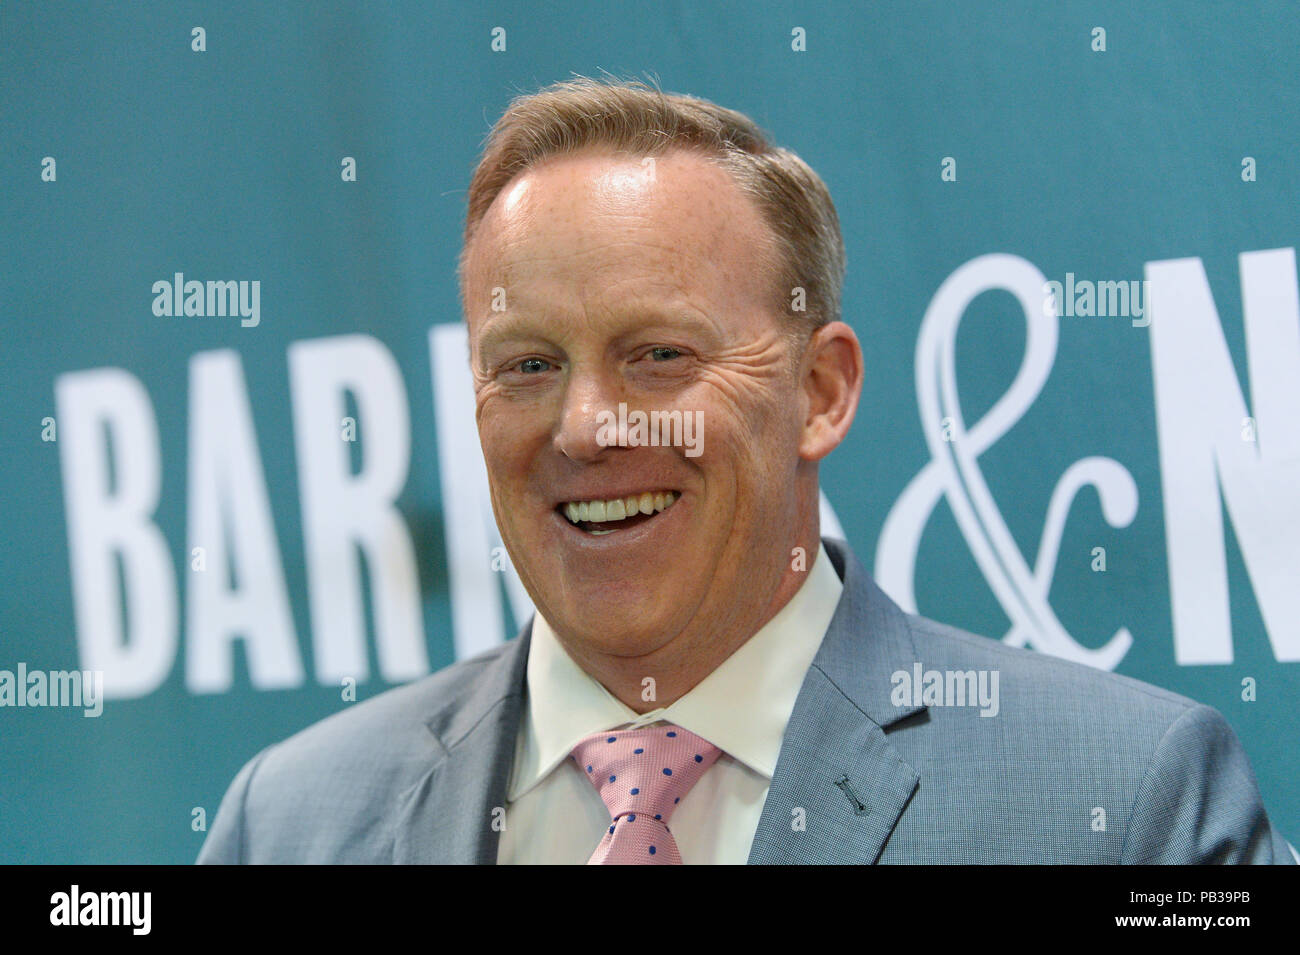 New York, USA. 25th July, 2018. Sean Spicer promotes his new book 'The Briefing: Politics, the Press, and the President' at Barnes & Noble Union Square on July 25, 2018 in New York City. Credit: Erik Pendzich/Alamy Live News Stock Photo